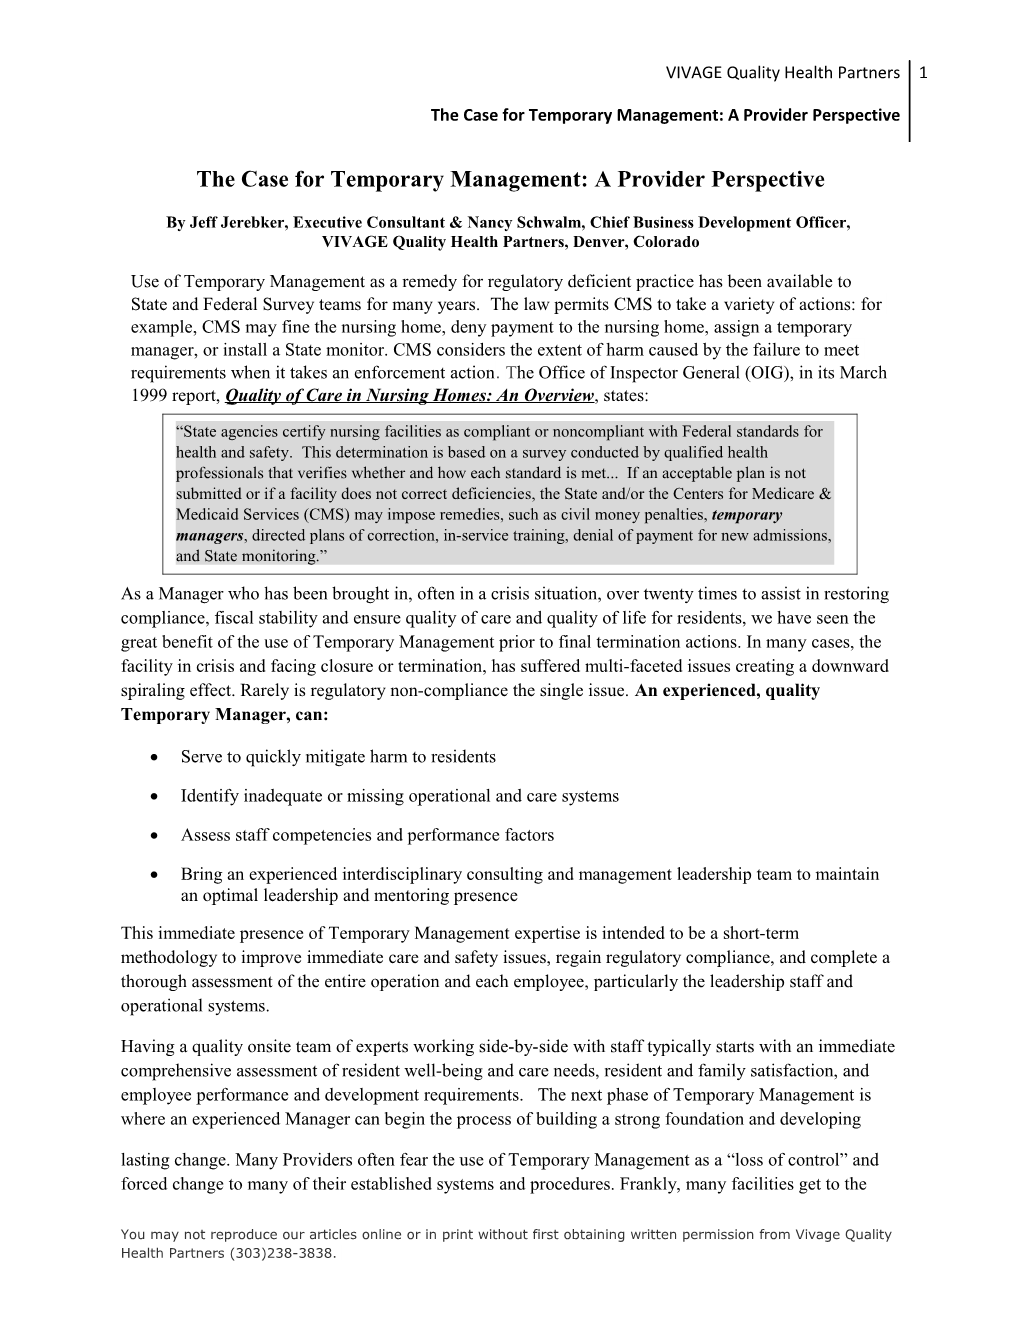 The Case for Temporary Management: a Provider Perspective